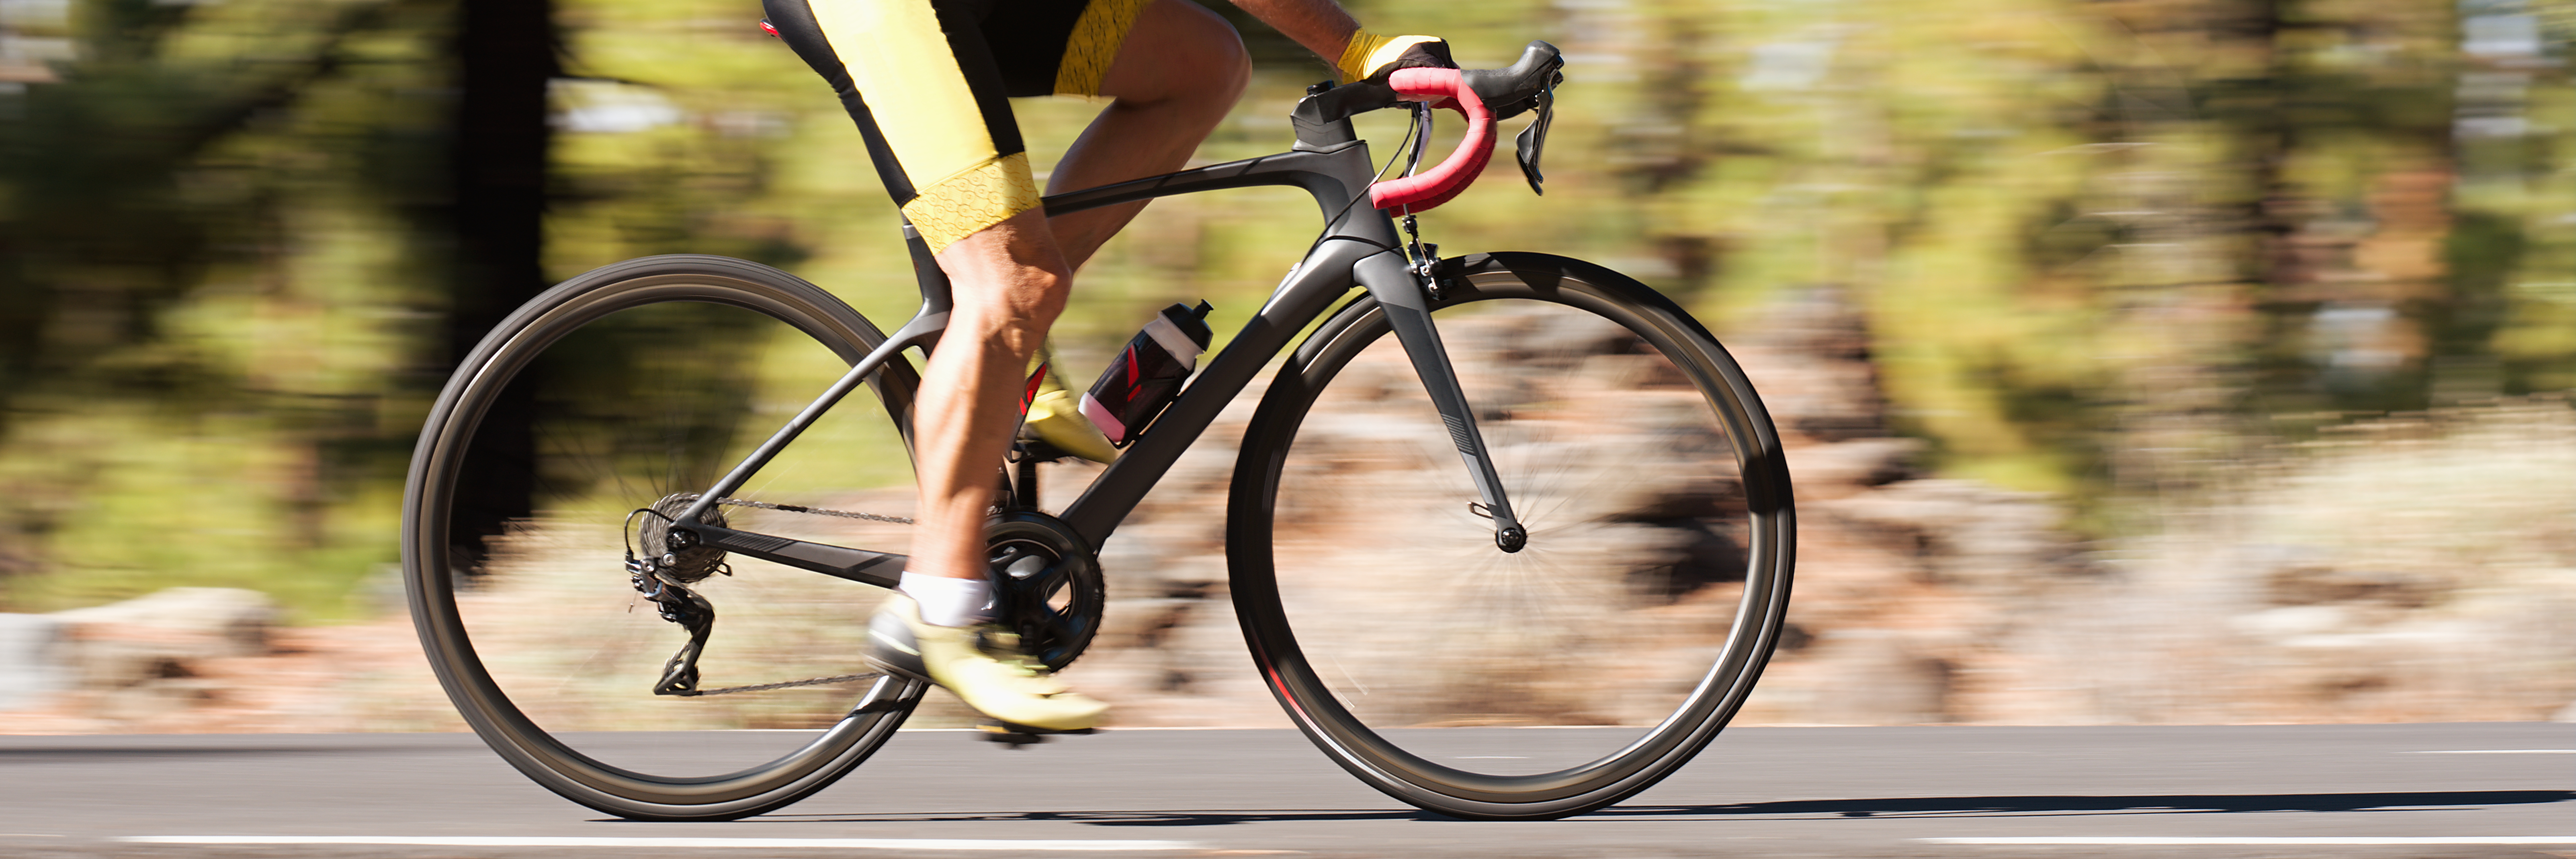 Pedaling with a high Cadence (pedal revolutions) is called Spinning, Mashing or Grinding is slow (and bad). (Source: Shutterstock)